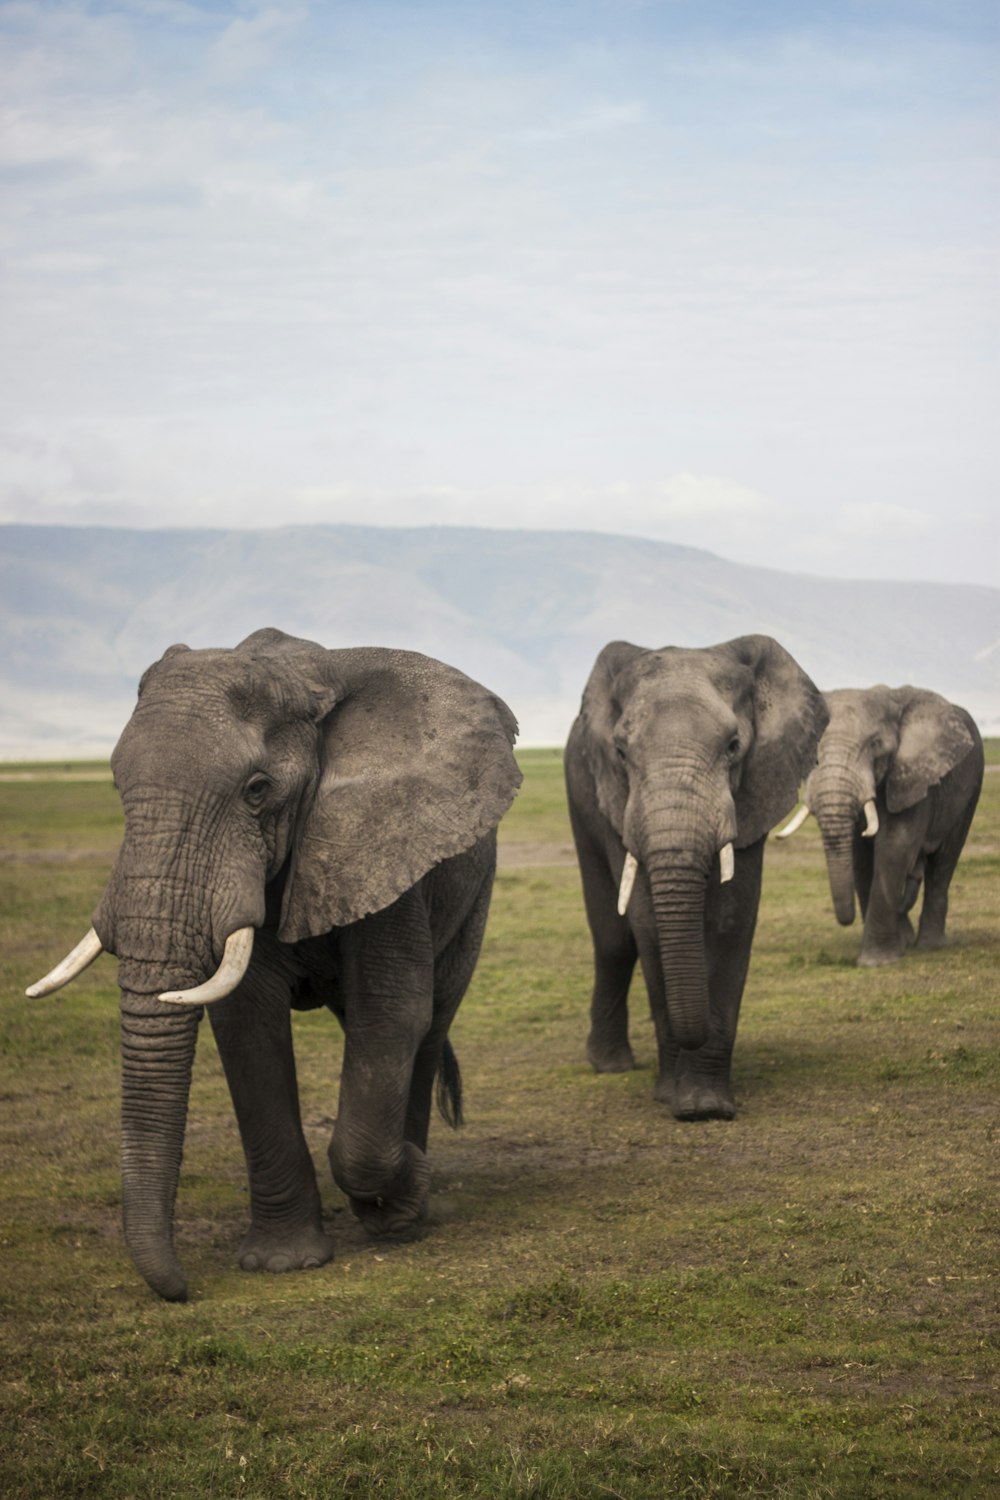 three elephants walking on grass field during day